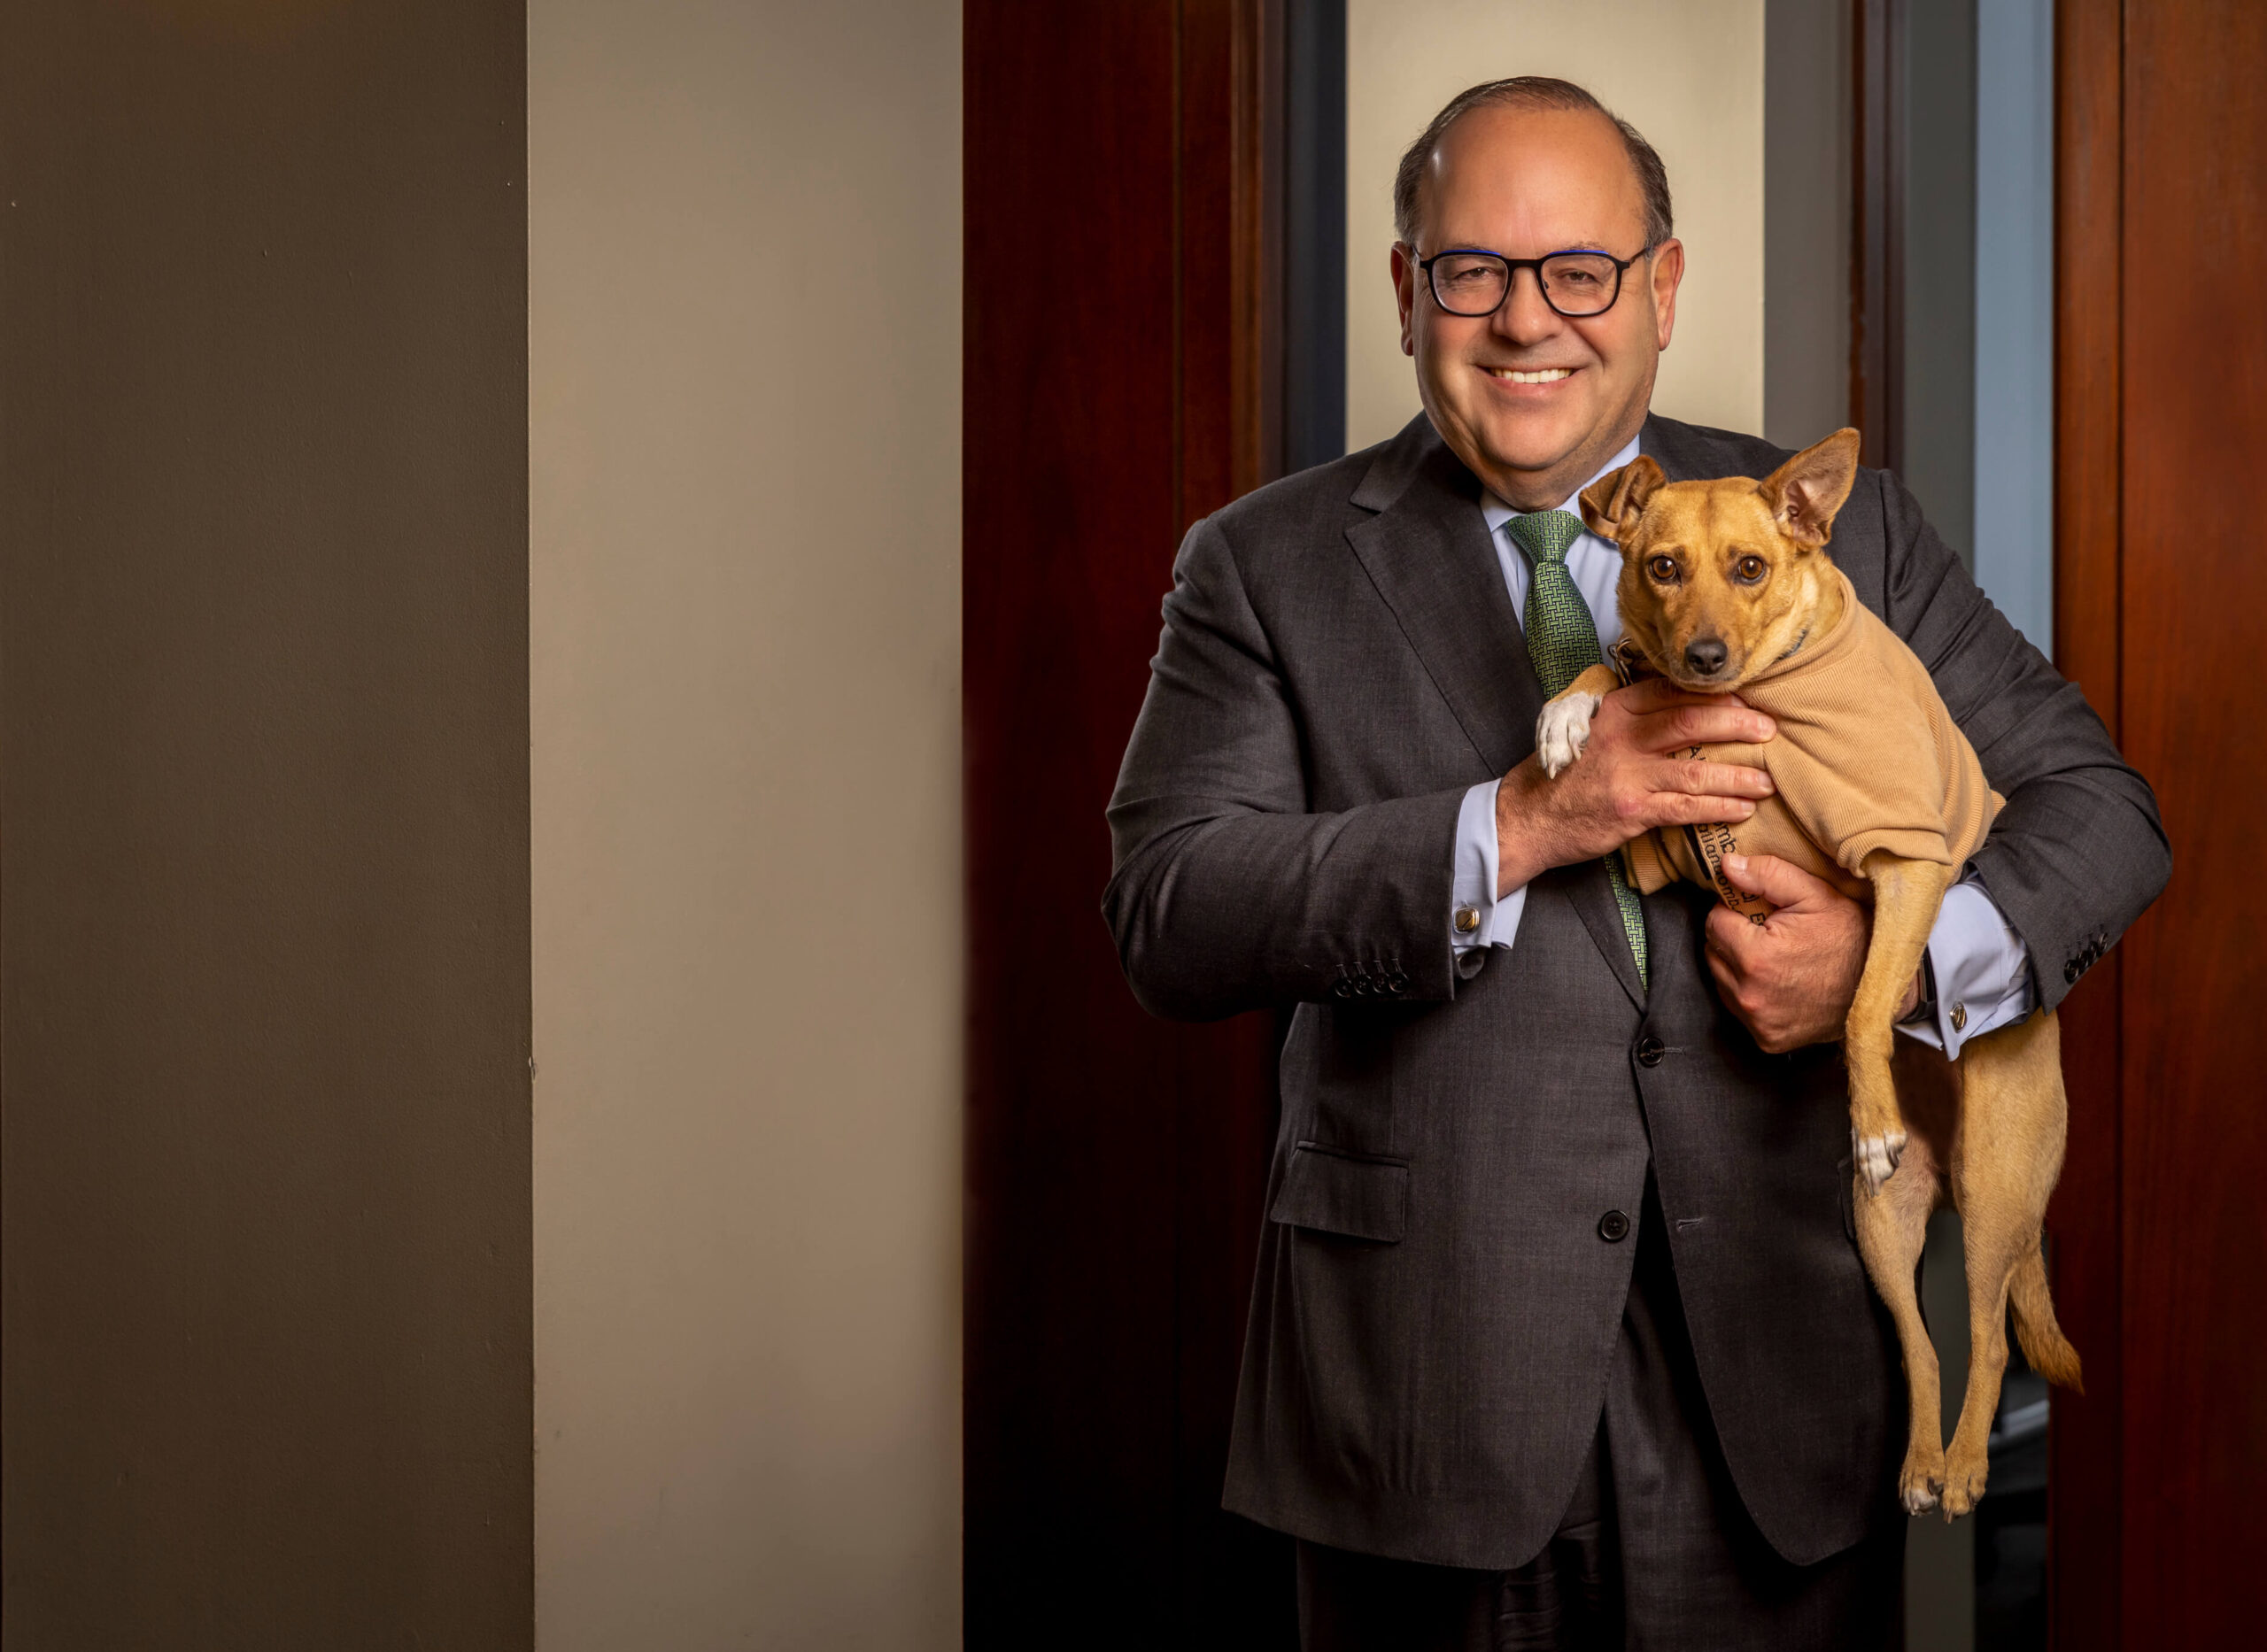 happy businessman wearing a classic suit and holding a dog